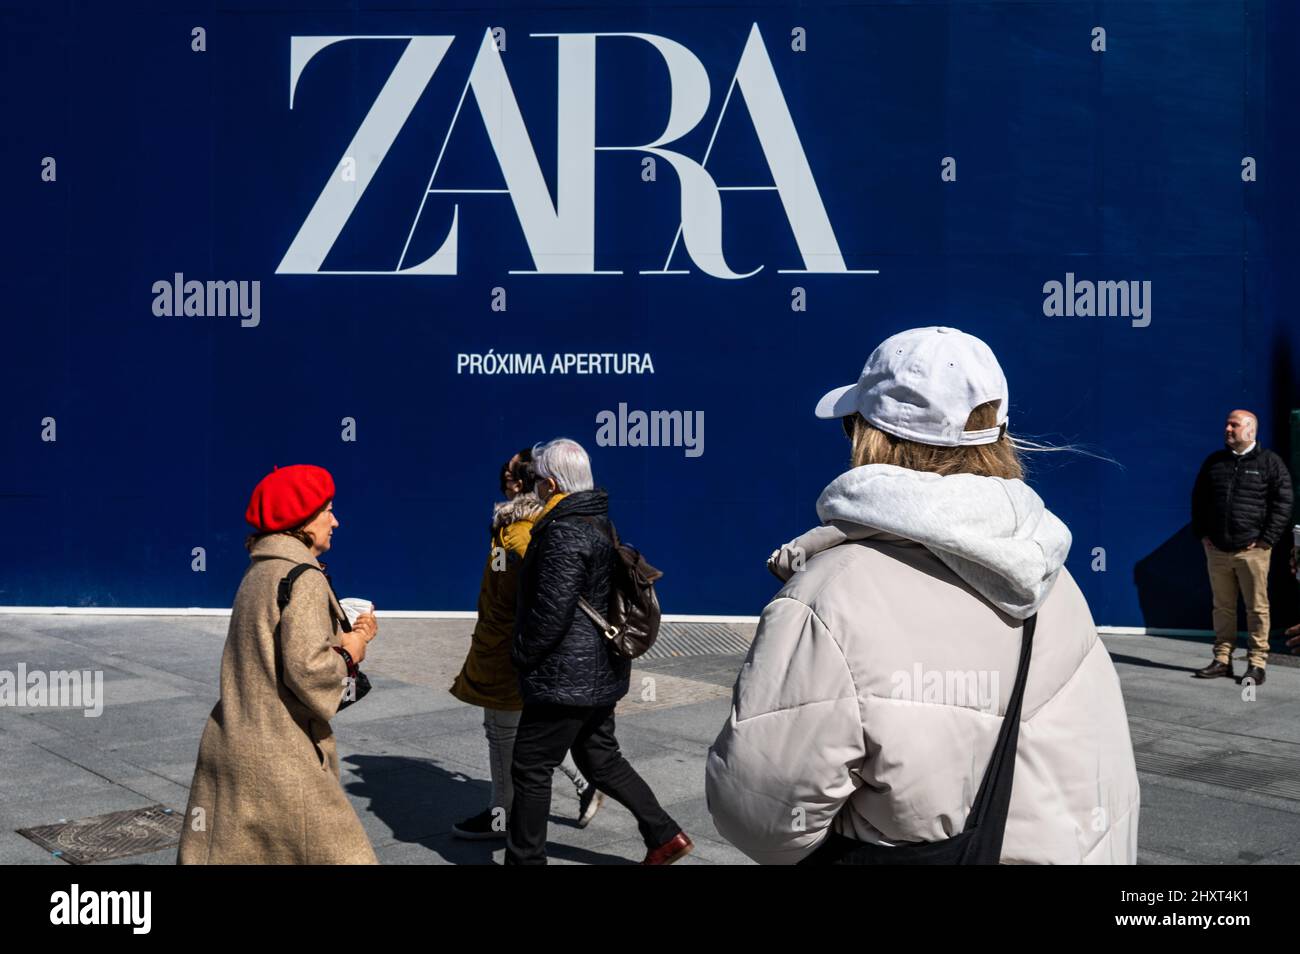 People walk past an advertisement for an upcoming opening of a Zara store. Zara shops are part of Inditex group, owned by Amancio Ortega. Stock Photo